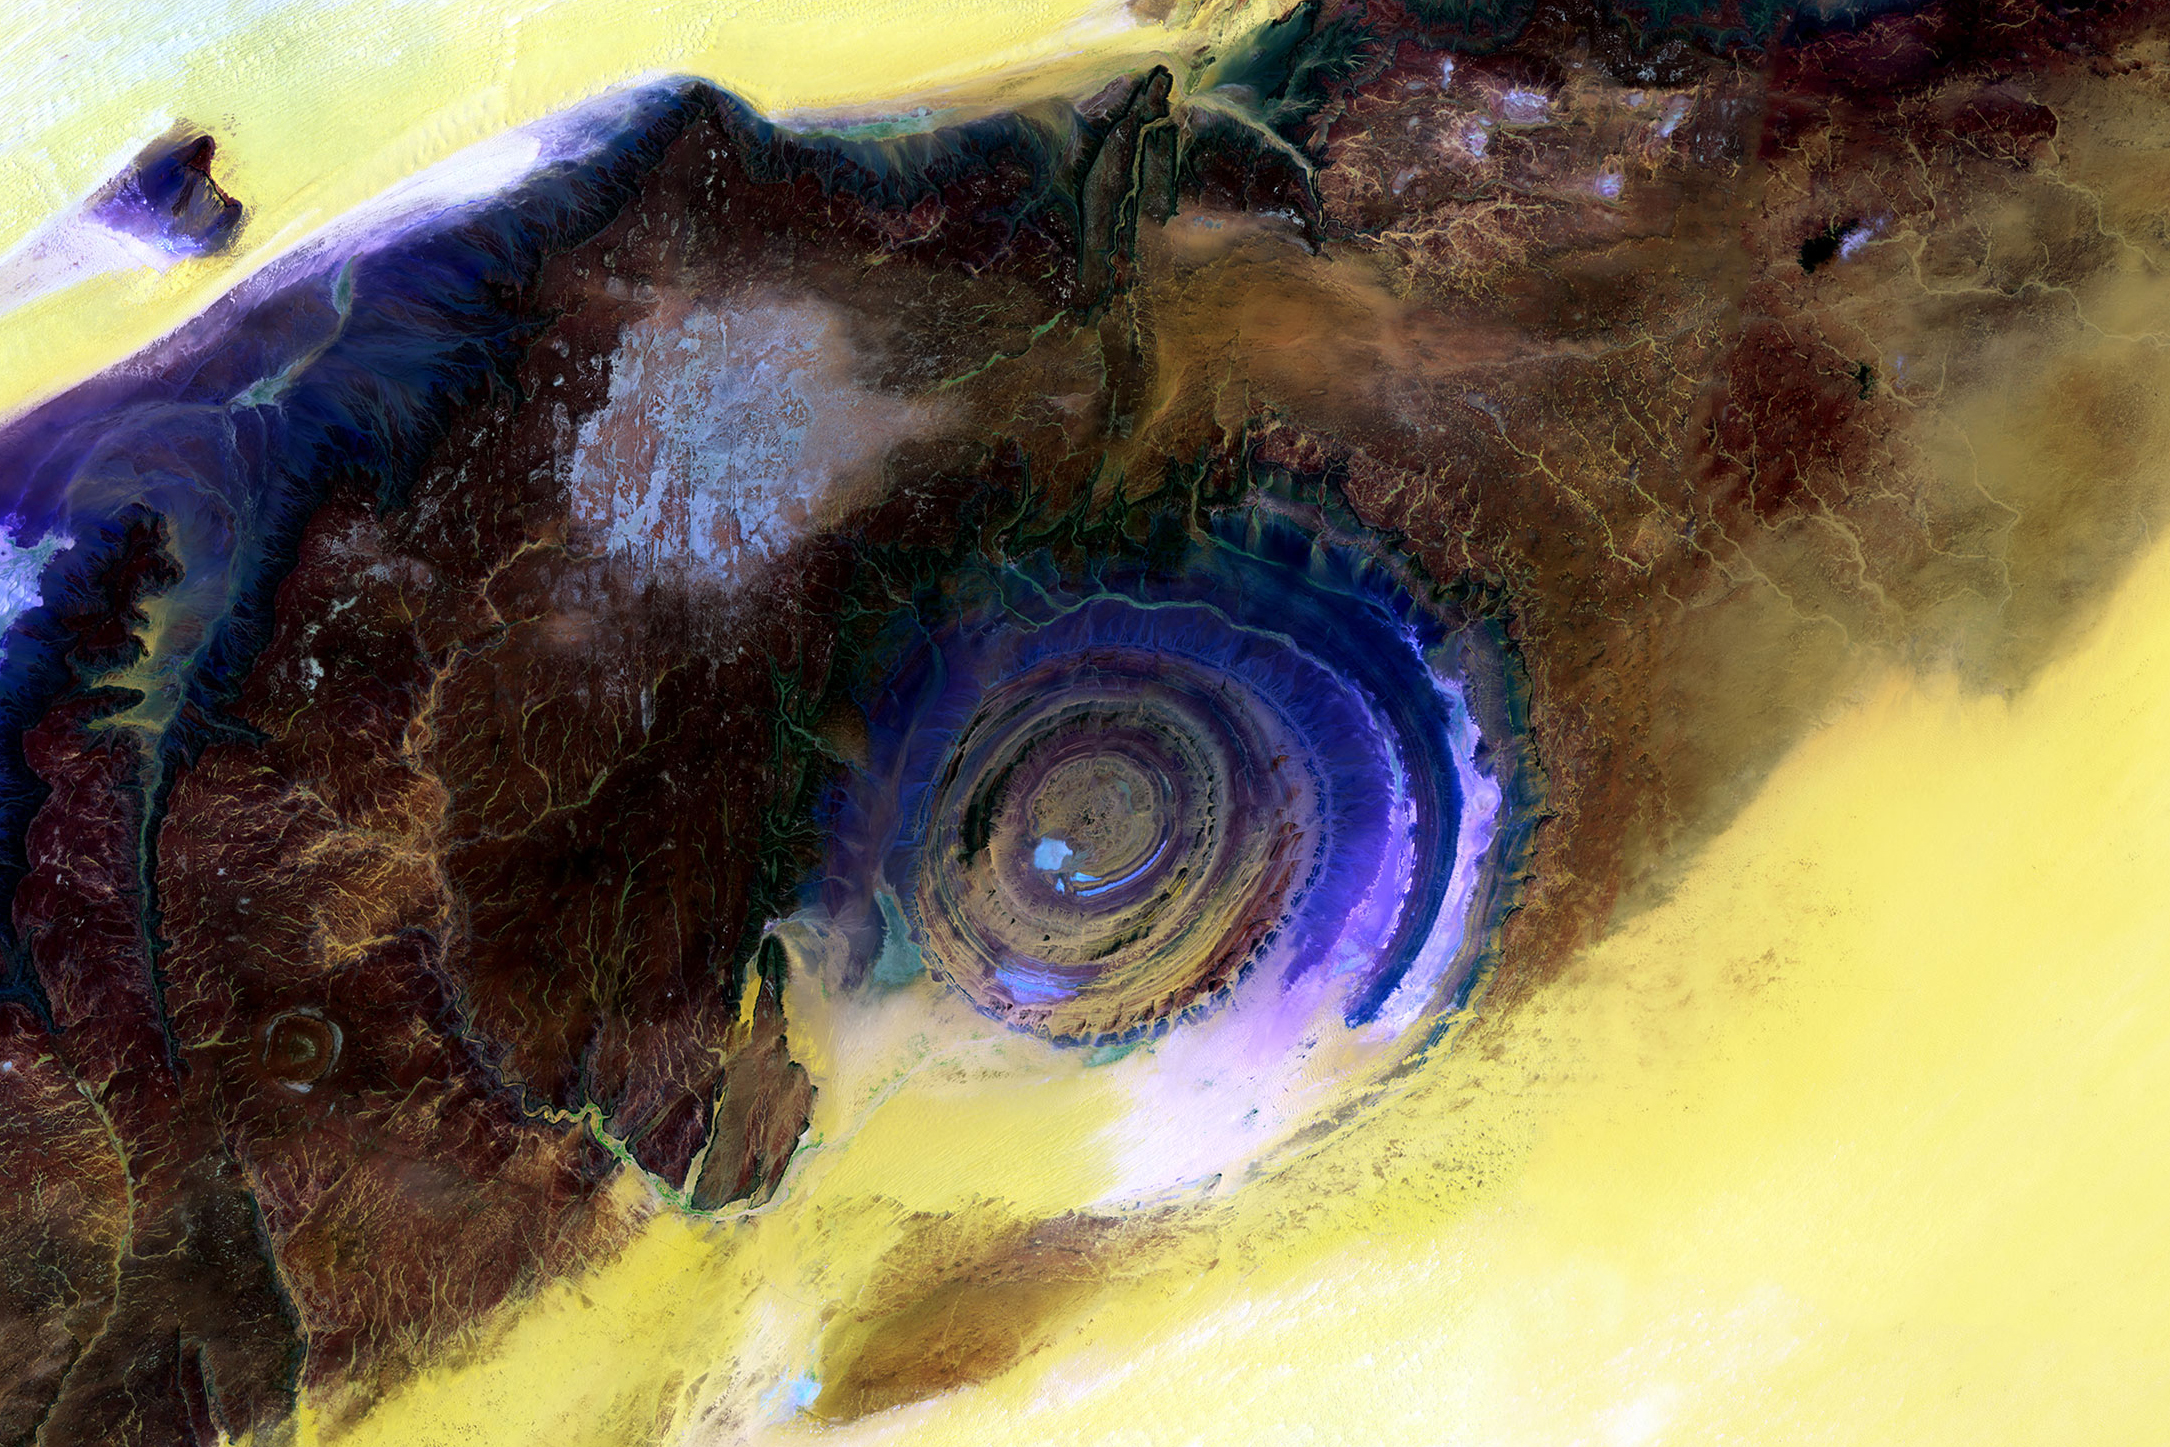 Eye of the Sahara, Mauritania
                              Scientists blended visible and infrared wavelengths to enhance the visibility of the different rock layers of this spectacular rock formation on the western edge of the Sahara desert. June 28 and July 5, 2015.